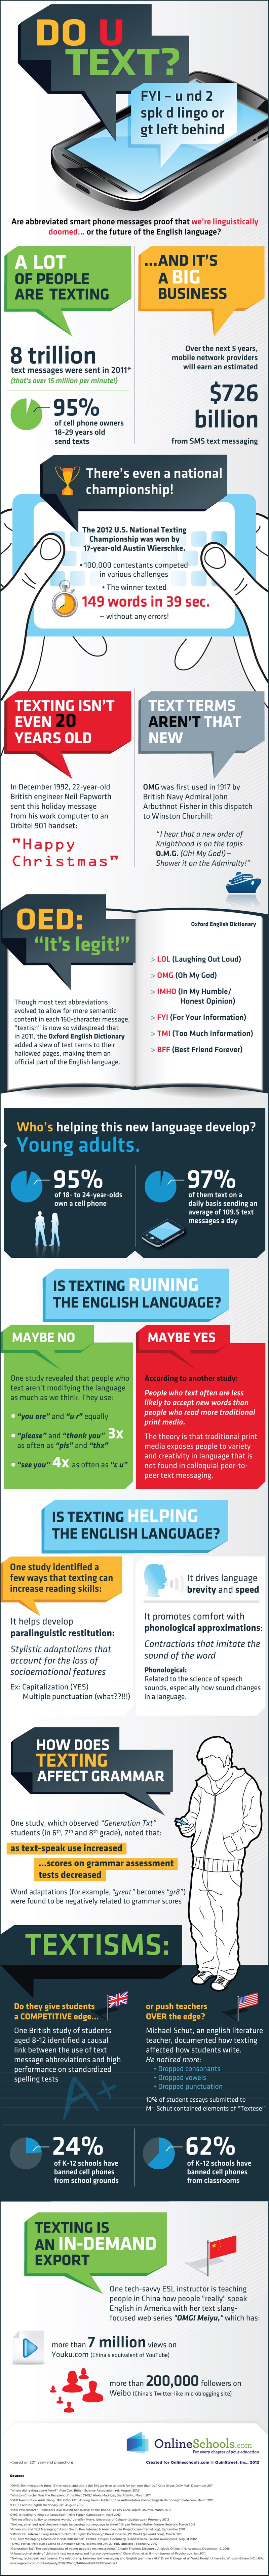 Texting Infographic